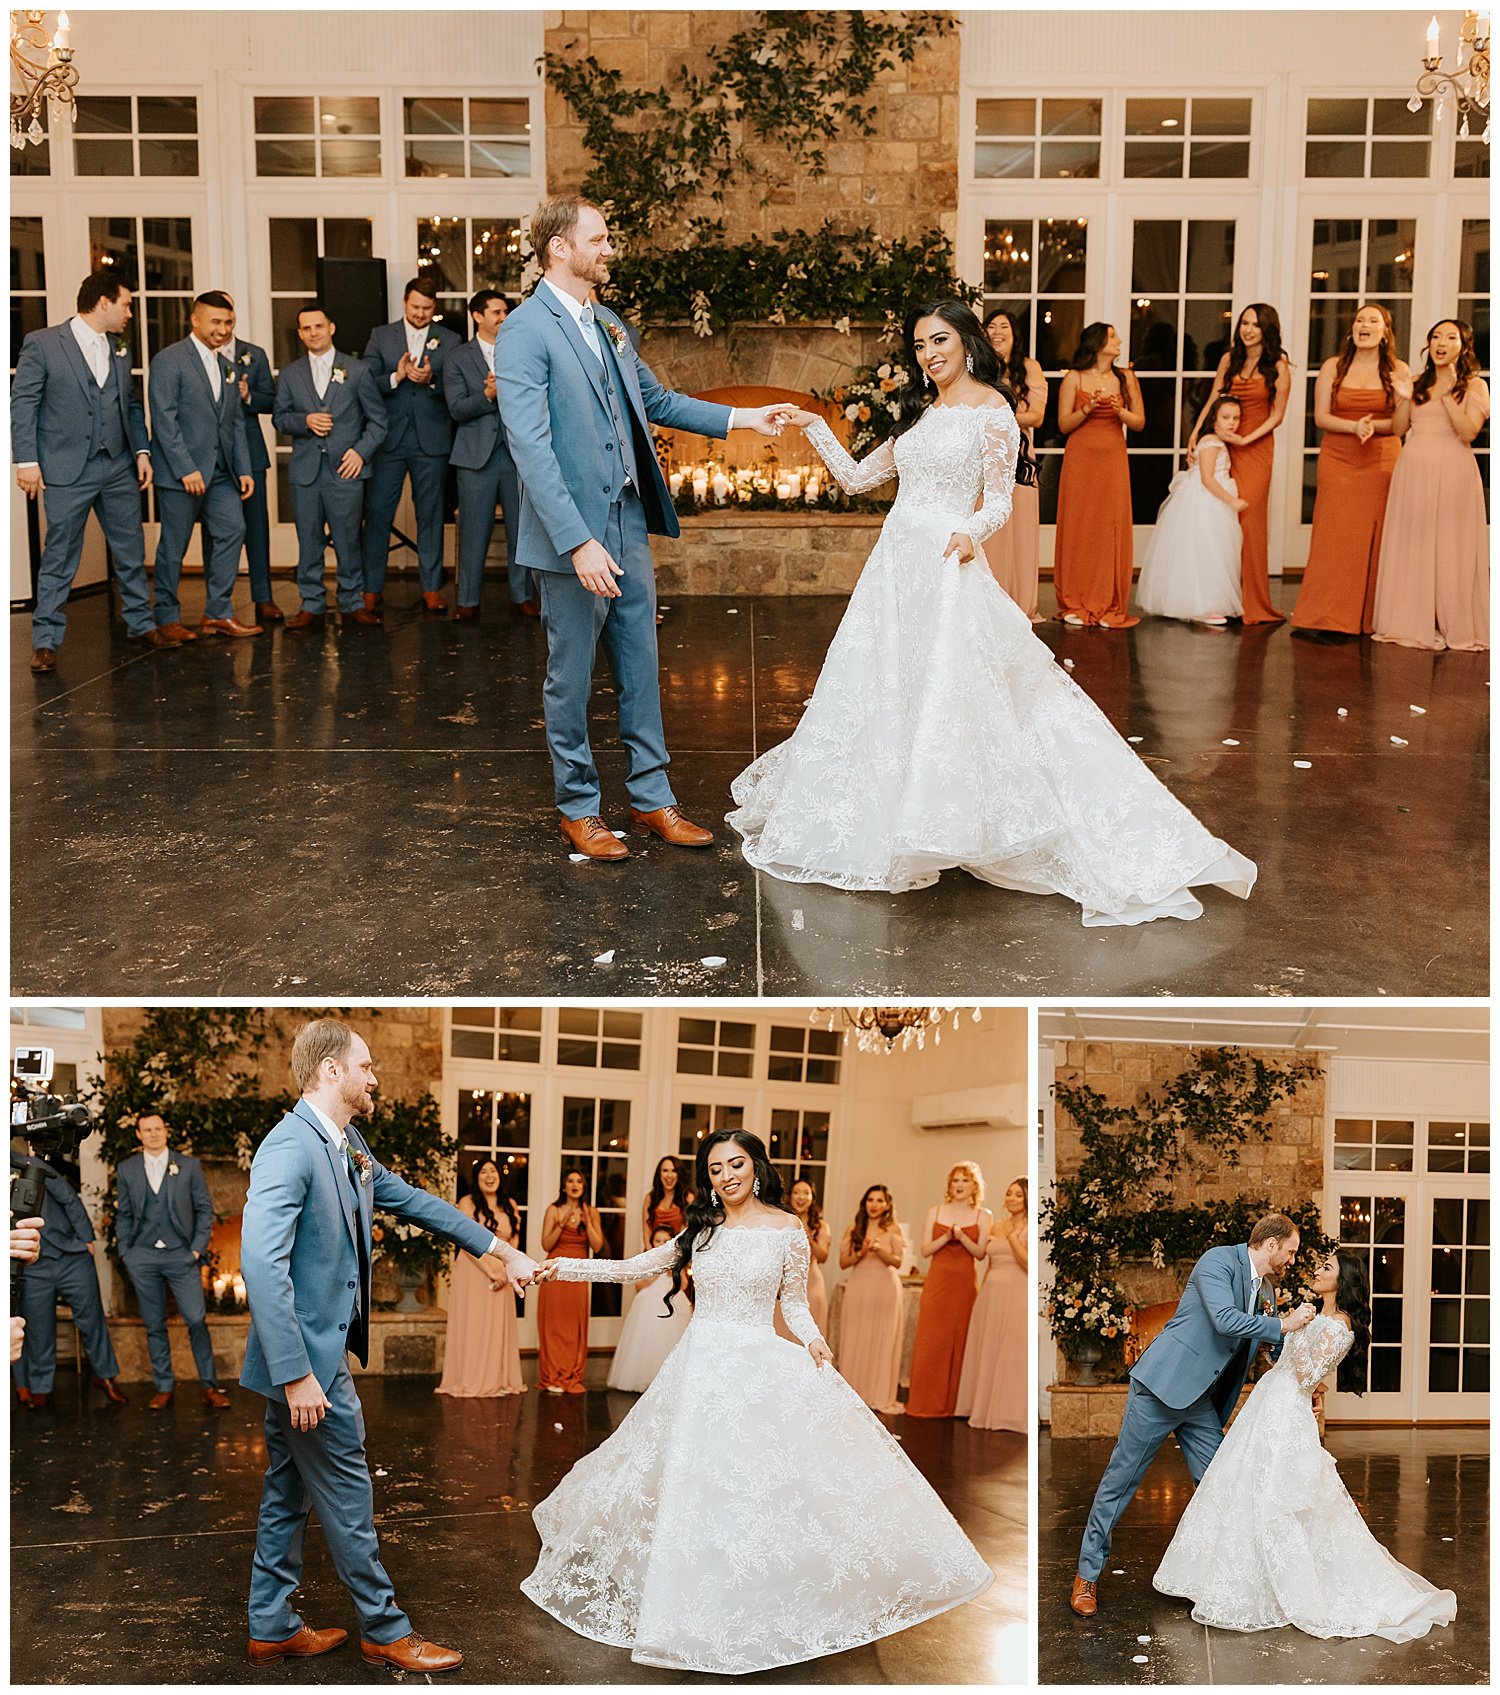 bride and groom first dance at reception flash photography danytabot wedding bridal dress